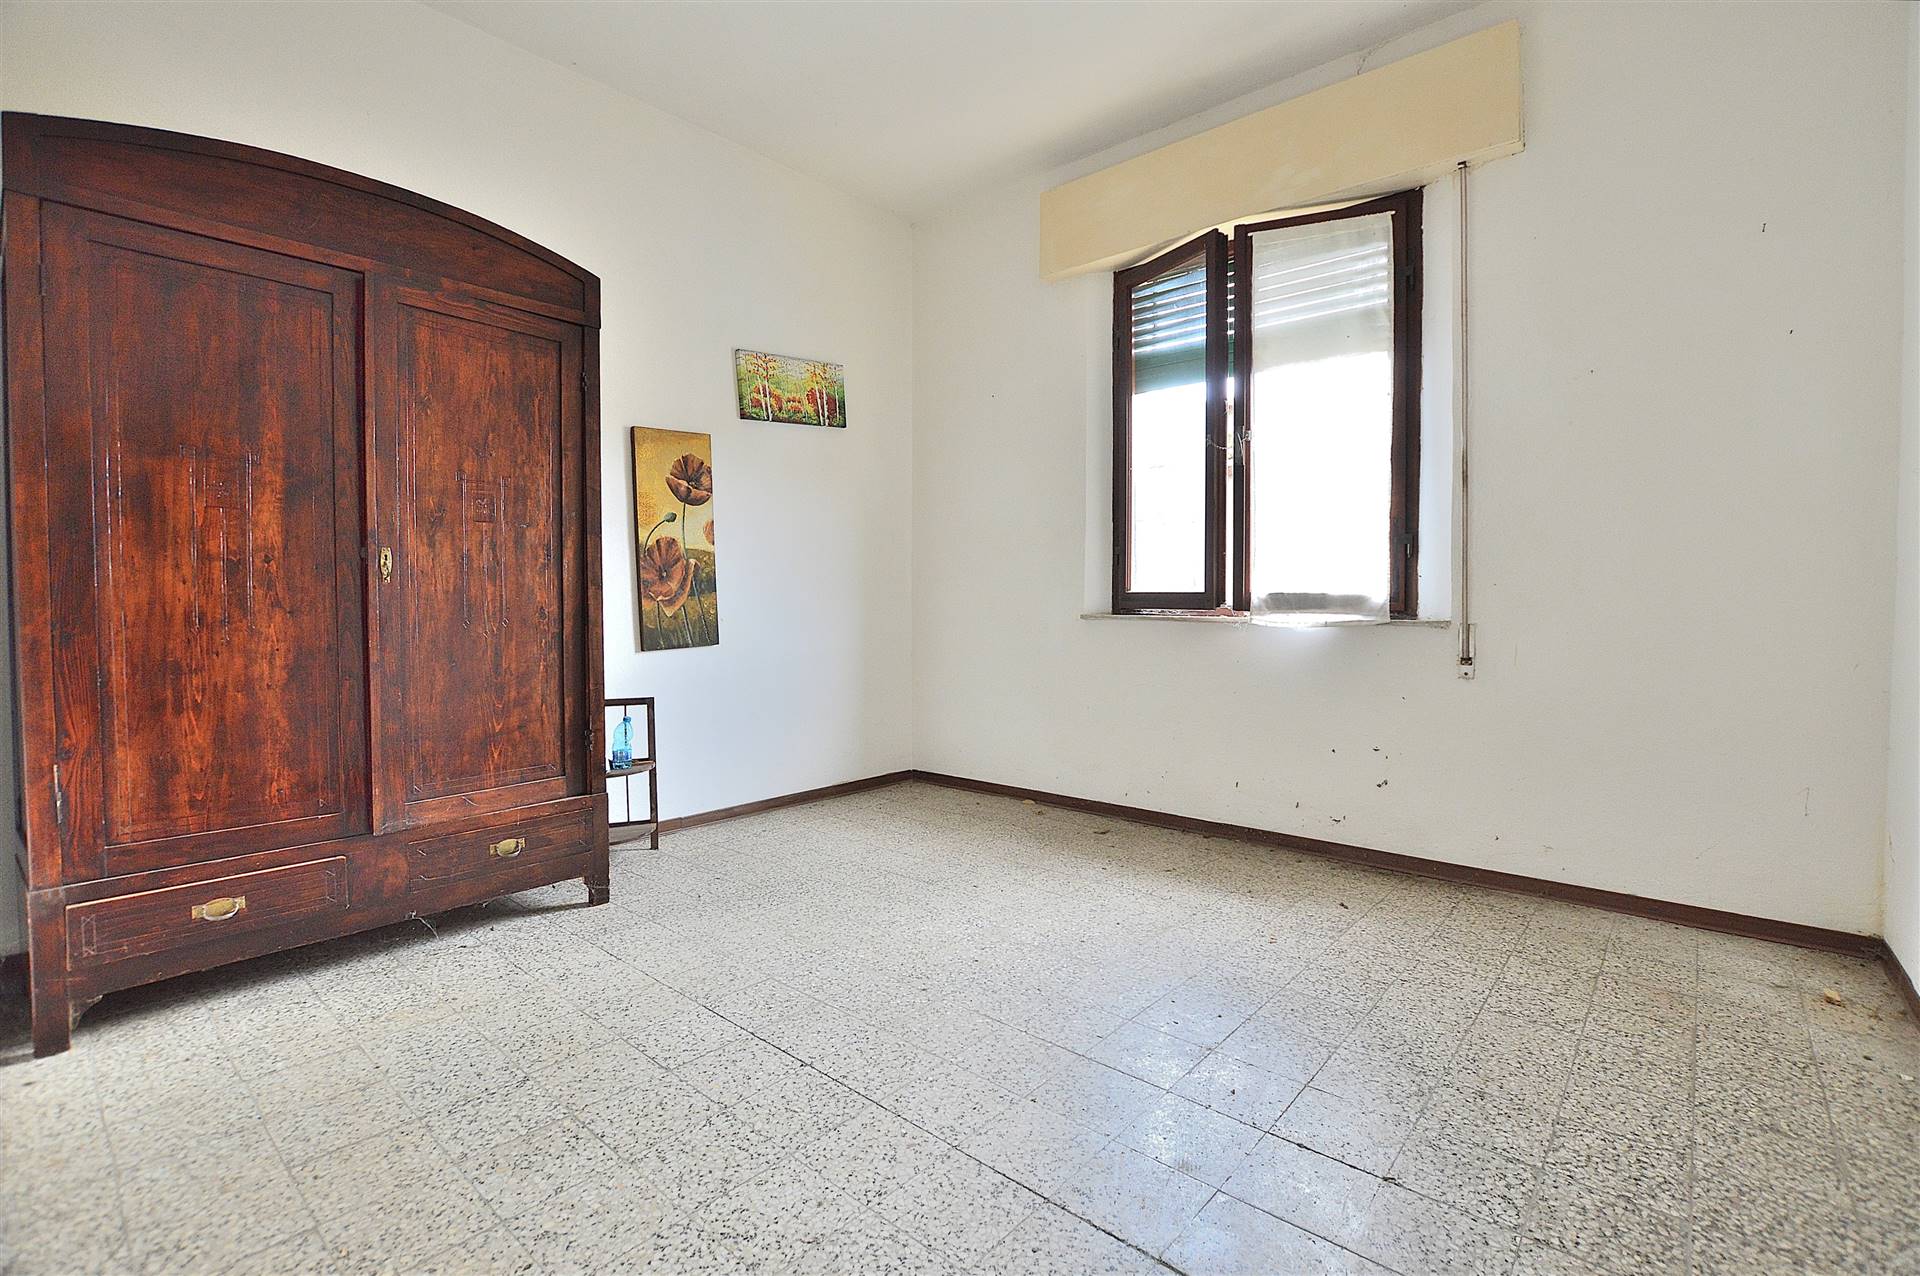 TORRENIERI, MONTALCINO, Apartment for sale of 50 Sq. mt., Be restored, Heating Non-existent, Energetic class: G, Epi: 175 kwh/m2 year, placed at 1° 